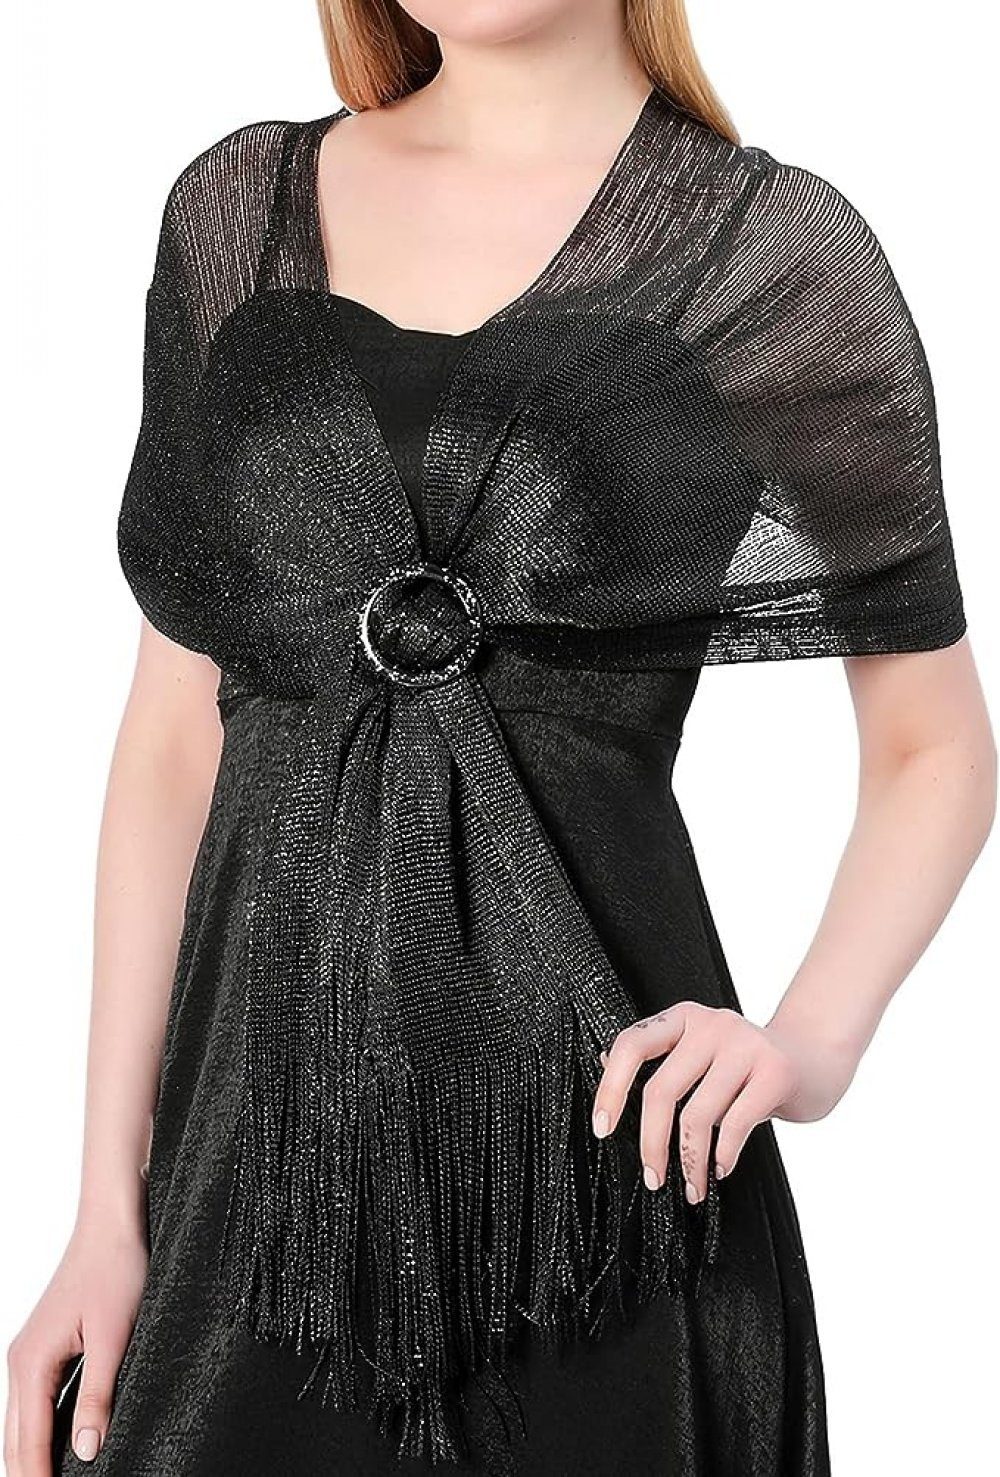 WaKuKa Schal Holiday metal buckle shawl suitable for sparkling evening parties SchwarzesSilber